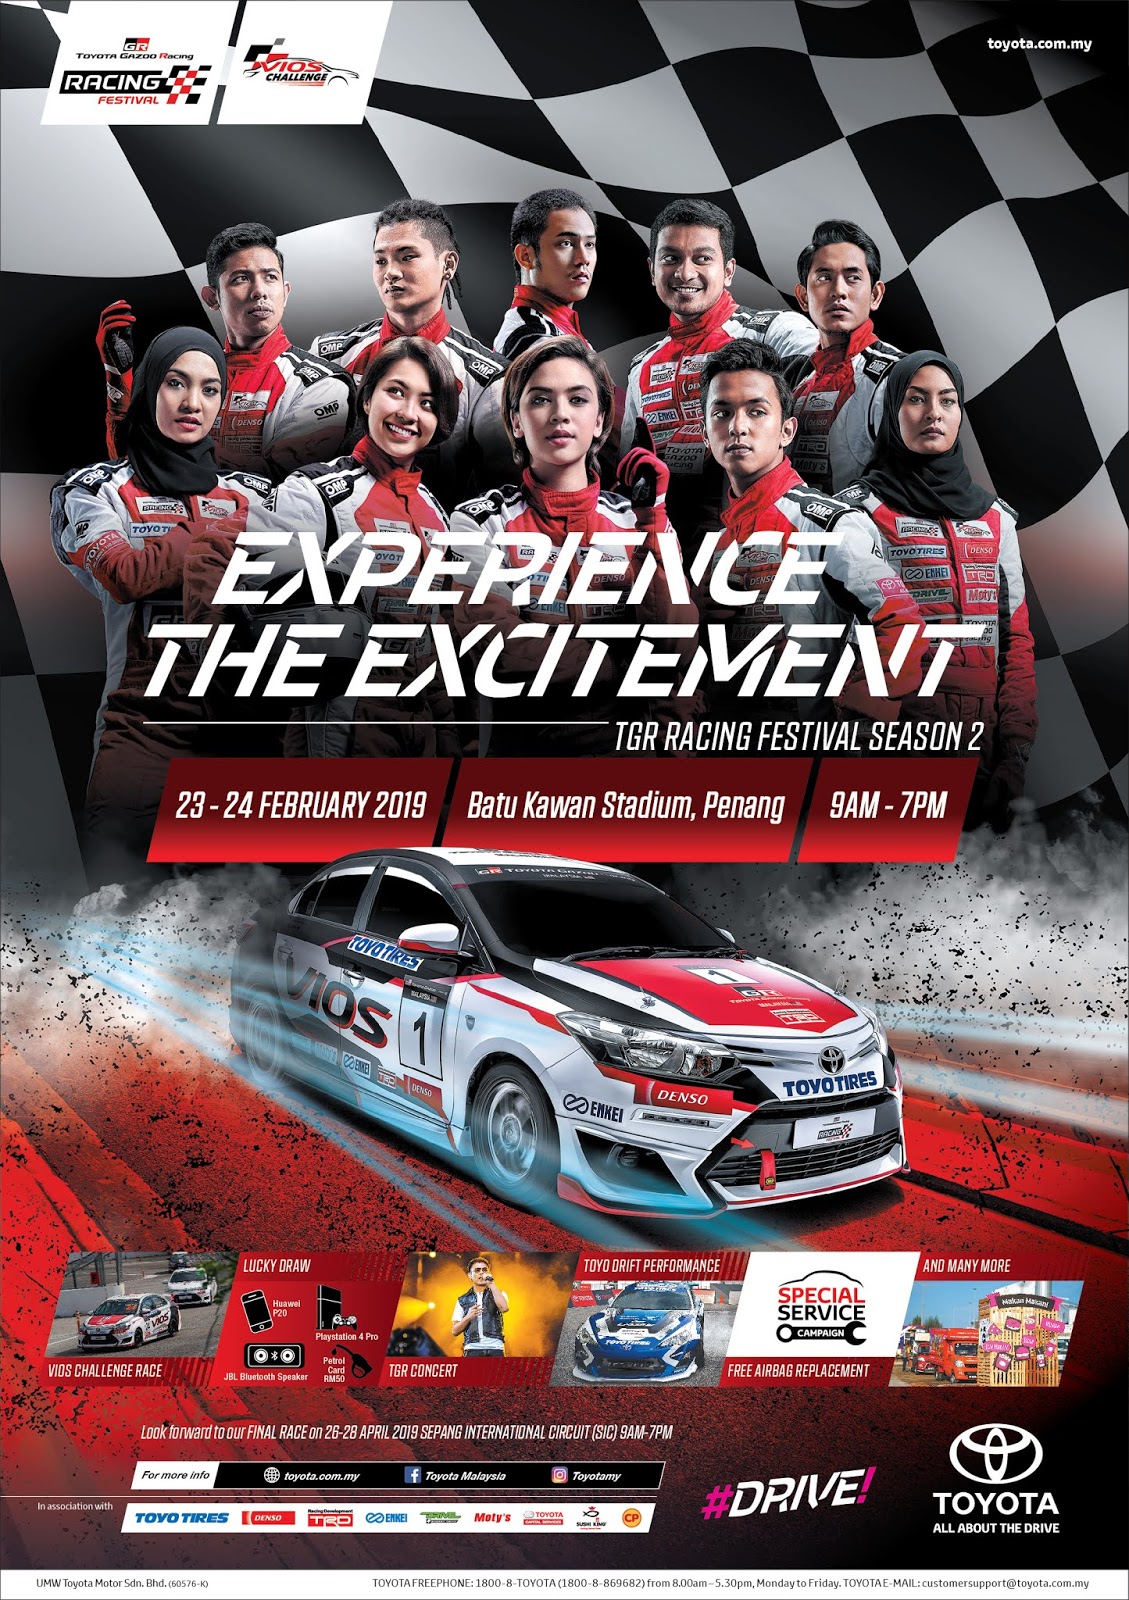 Motoring Malaysia Toyota Gazoo Racing Tgr Racing Festival And Round 3 Of The Toyota Vios Challenge Will Be Held This Weekend 23 24 February 2019 In Batu Kawan